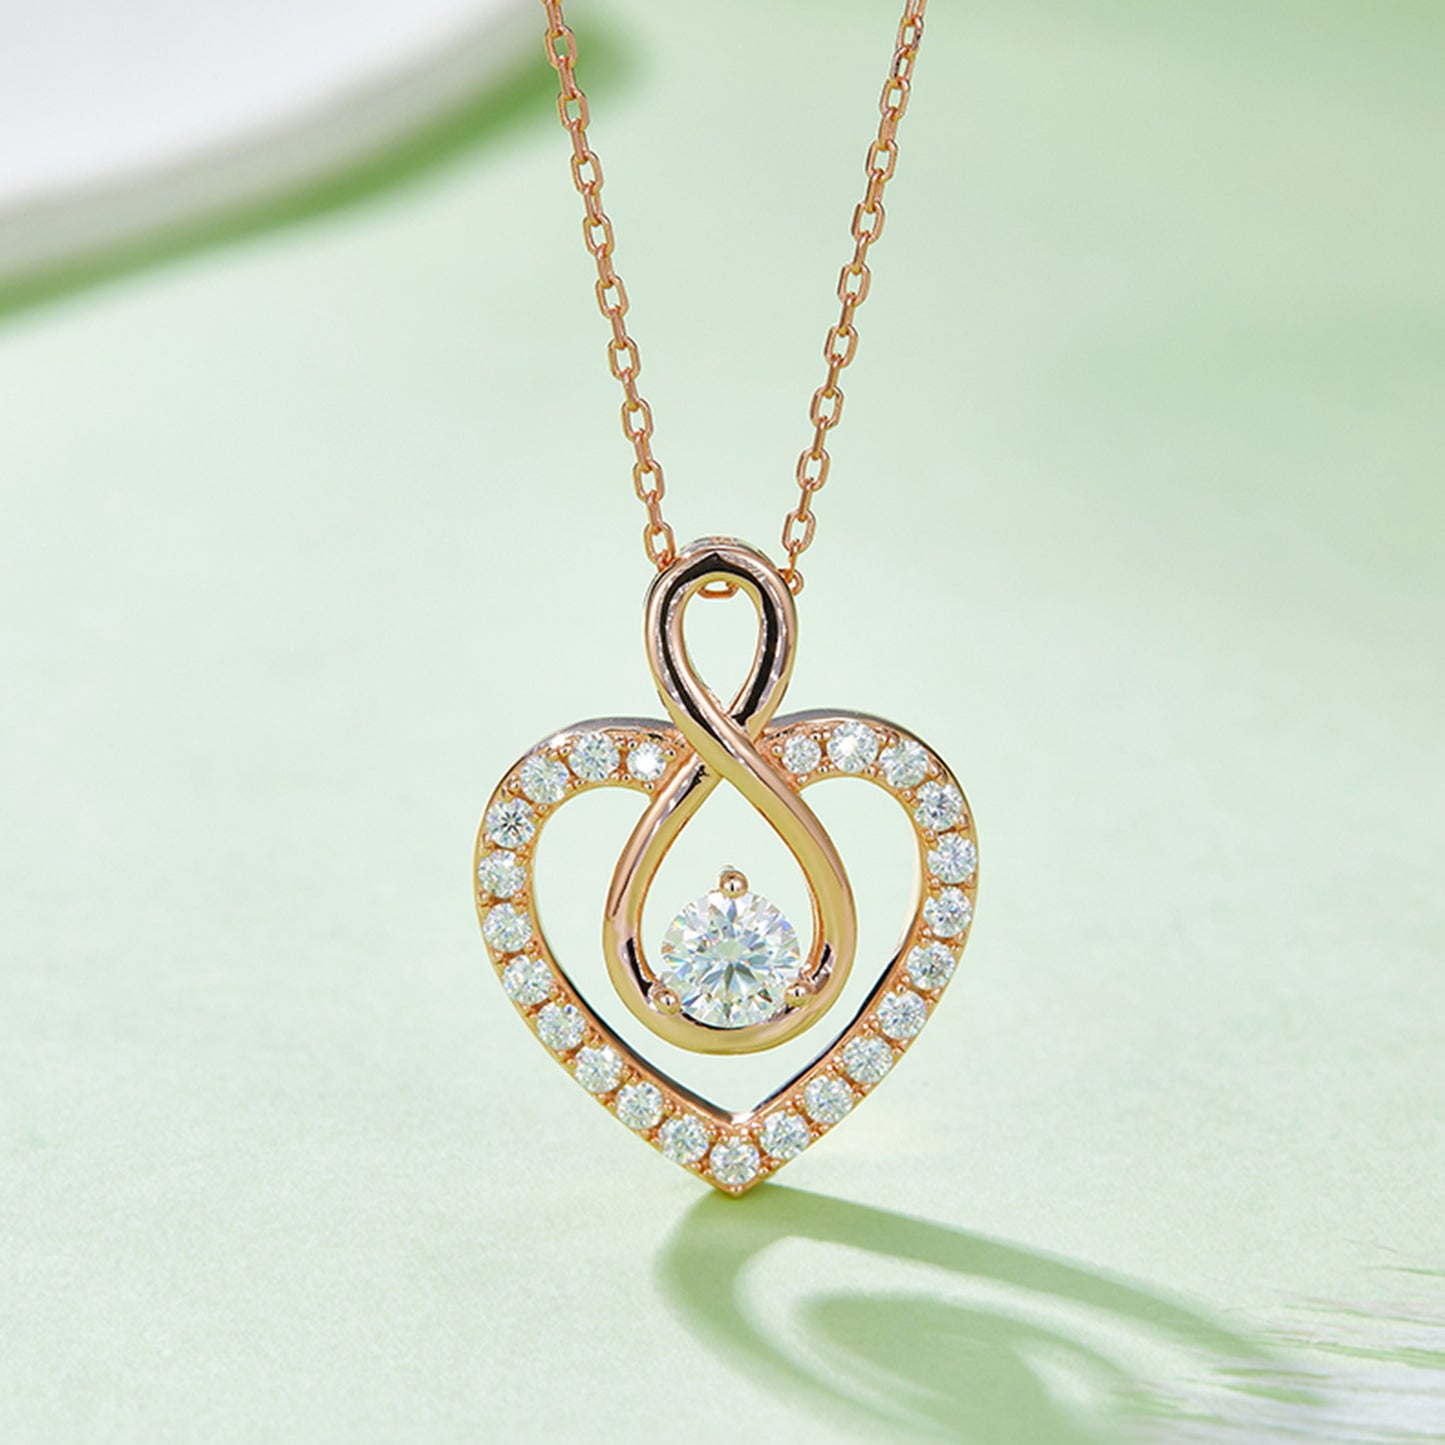 PREORDER- 1 Carat Moissanite 925 Sterling Silver Heart Shape Necklace